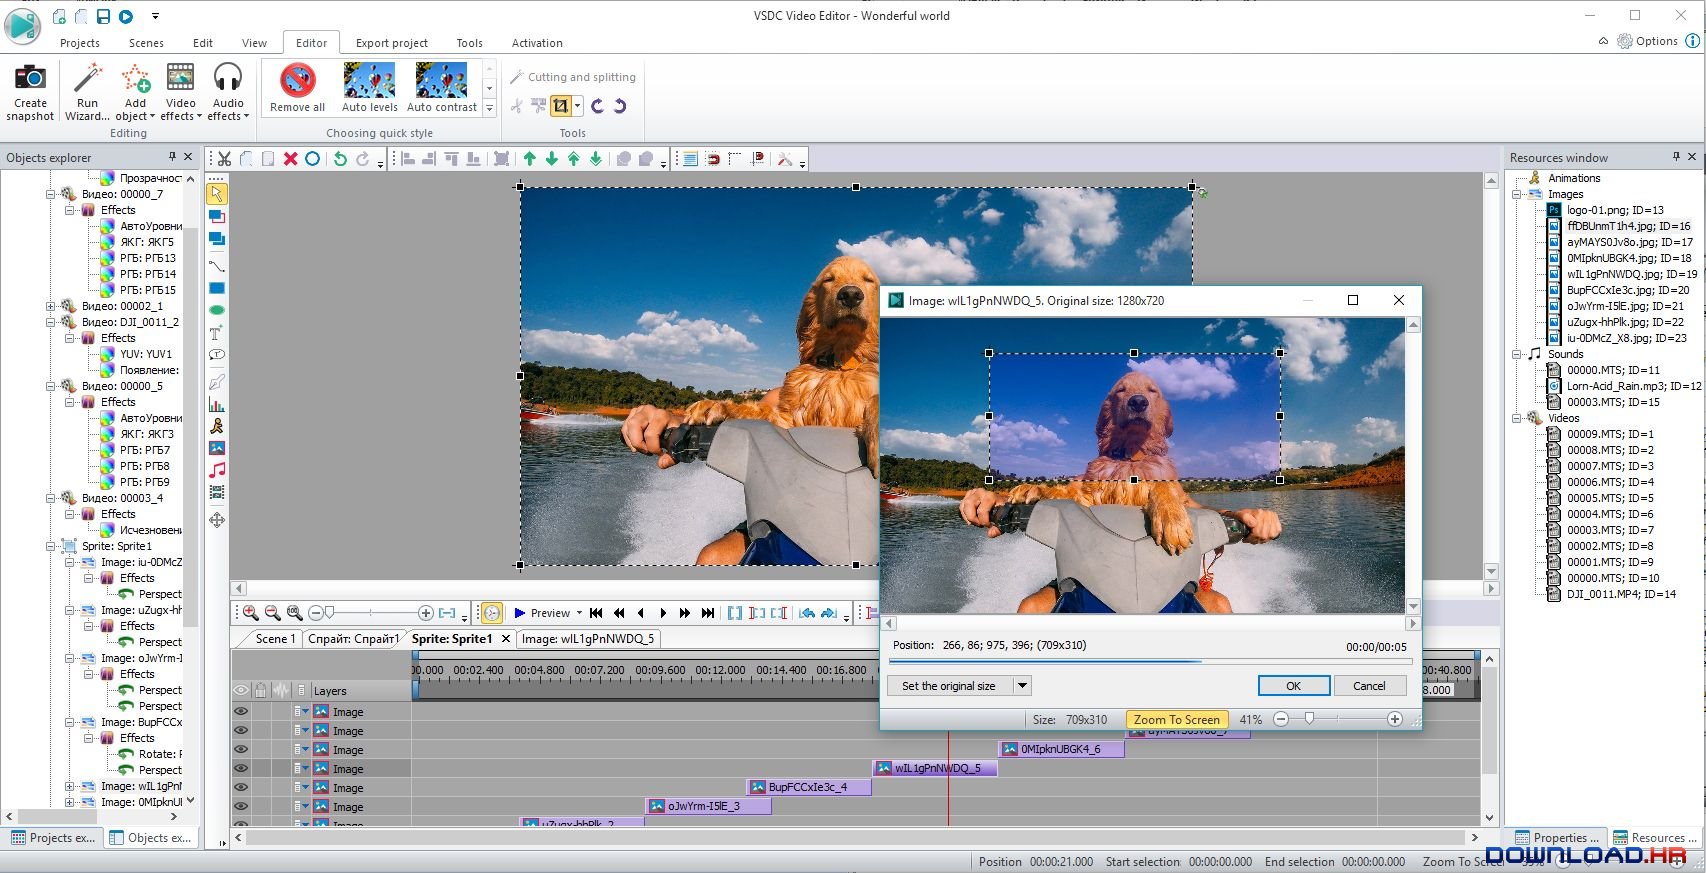 VSDC Free Video Editor 6.4.2.107 6.4.2.107 Featured Image for Version 6.4.2.107